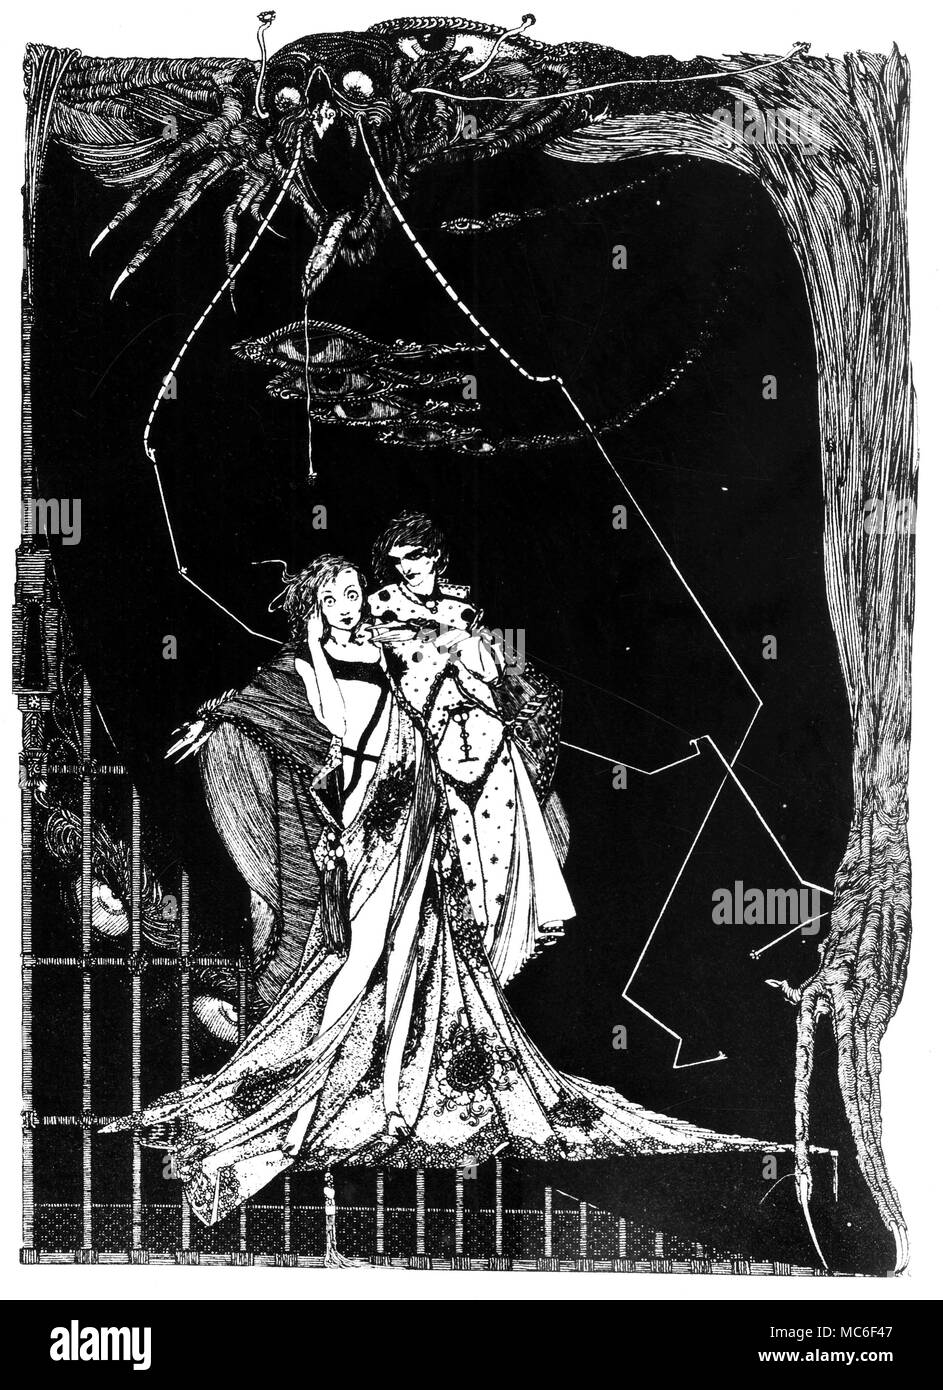 Faust and Gretchen - illustration by Harry Clarke to Goethe's 'Faust', 1925 Stock Photo